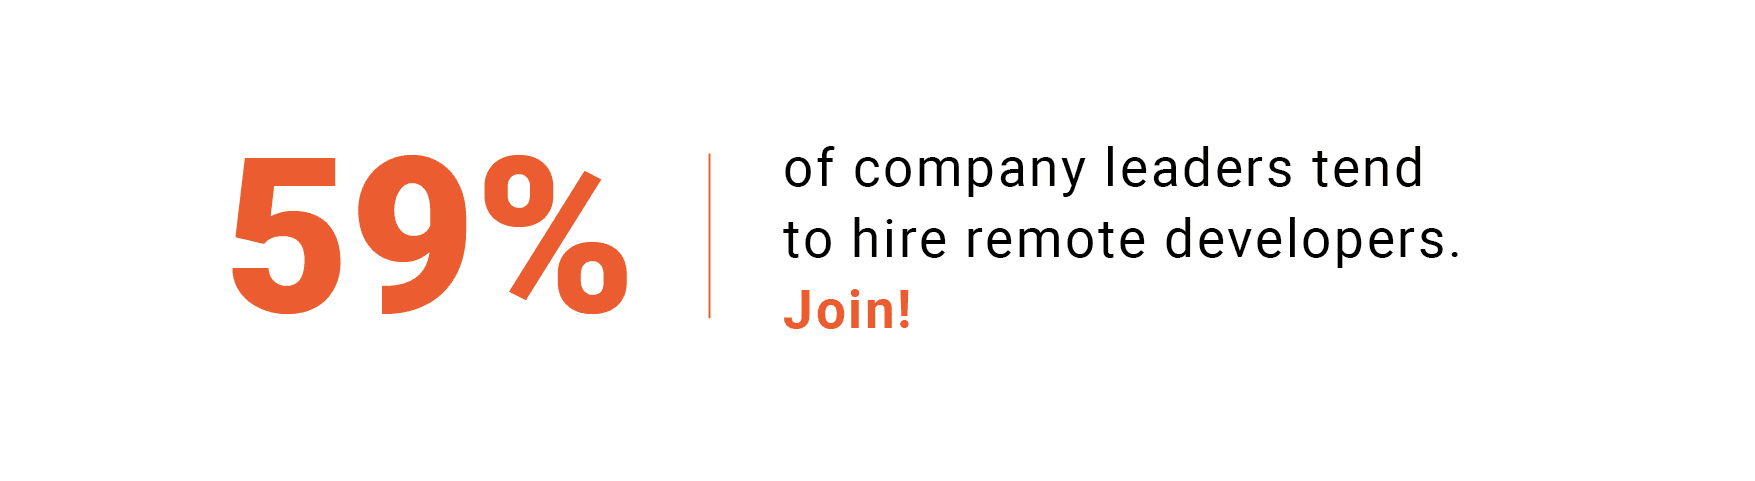 59% of company leaders tend to hire remote software developers